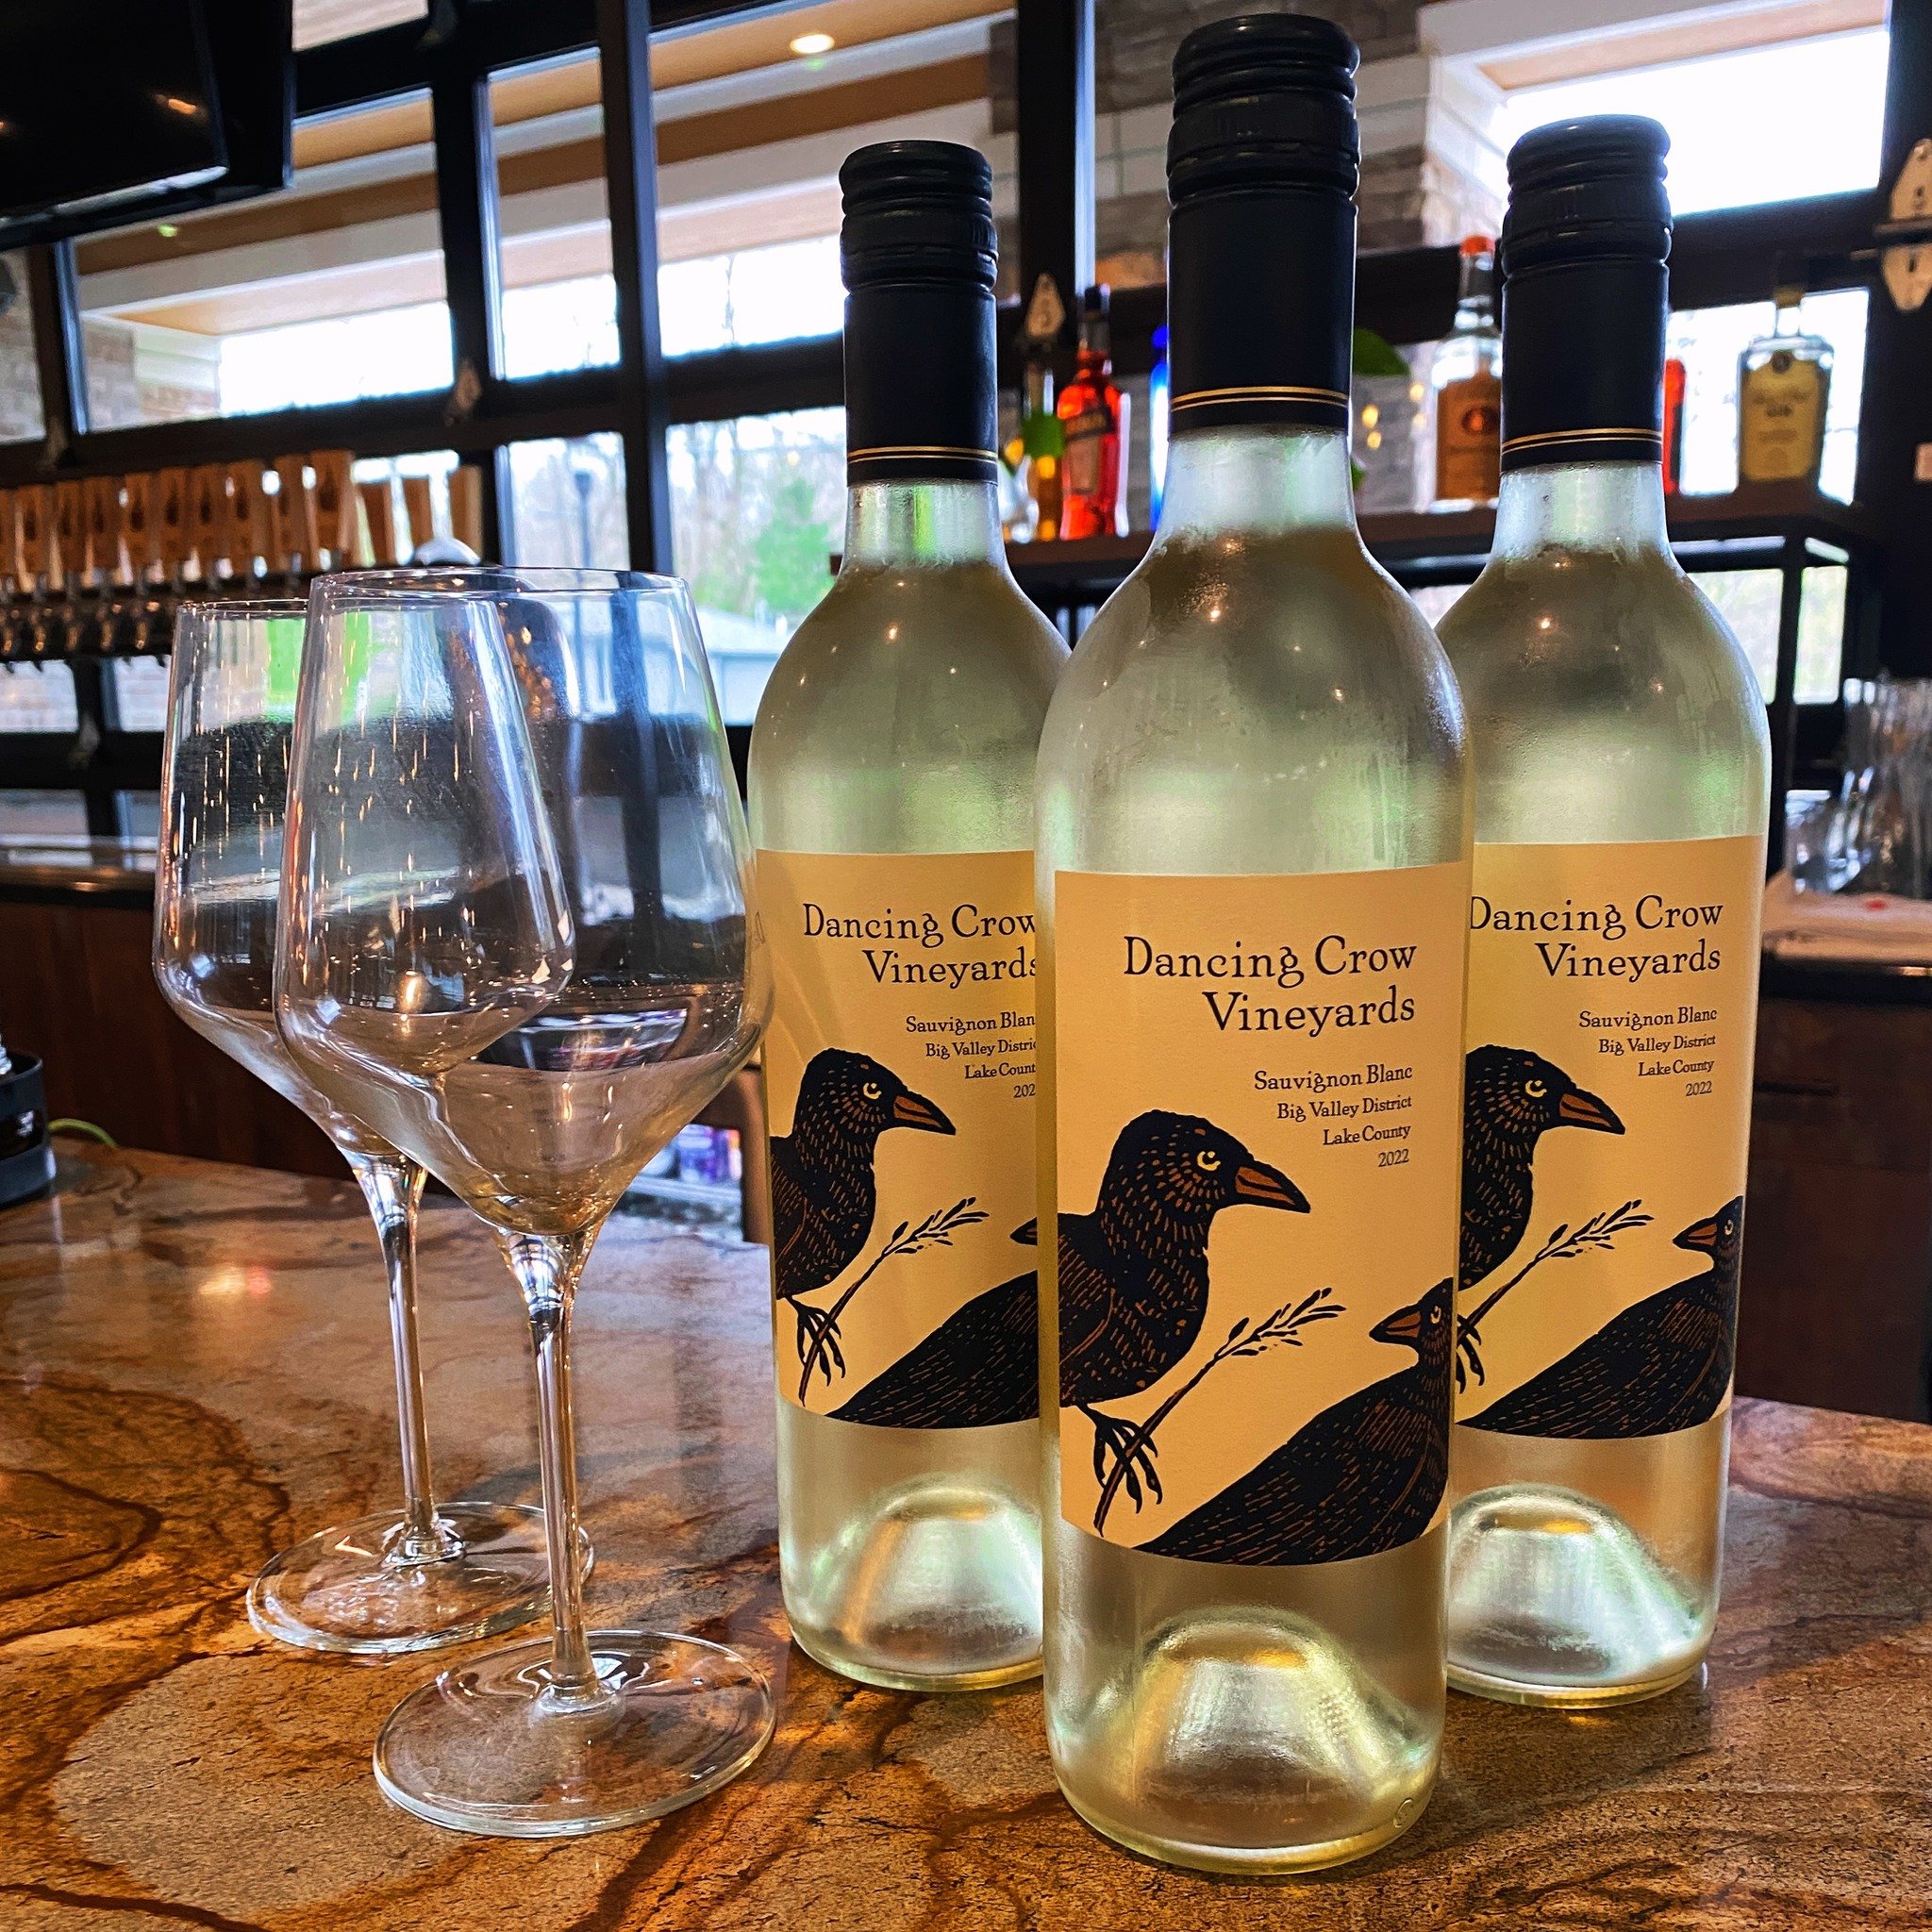 Wine of the Month at our Lebanon Bottle Shop is Dancing Crow Vineyards Sauvignon Blanc. The palate is juicy with ripe orange, volcanic minerality and fresh, sweet grapefruit.  The grapes sit at 1400 ft. elevation near the base of Mount Konocti on the